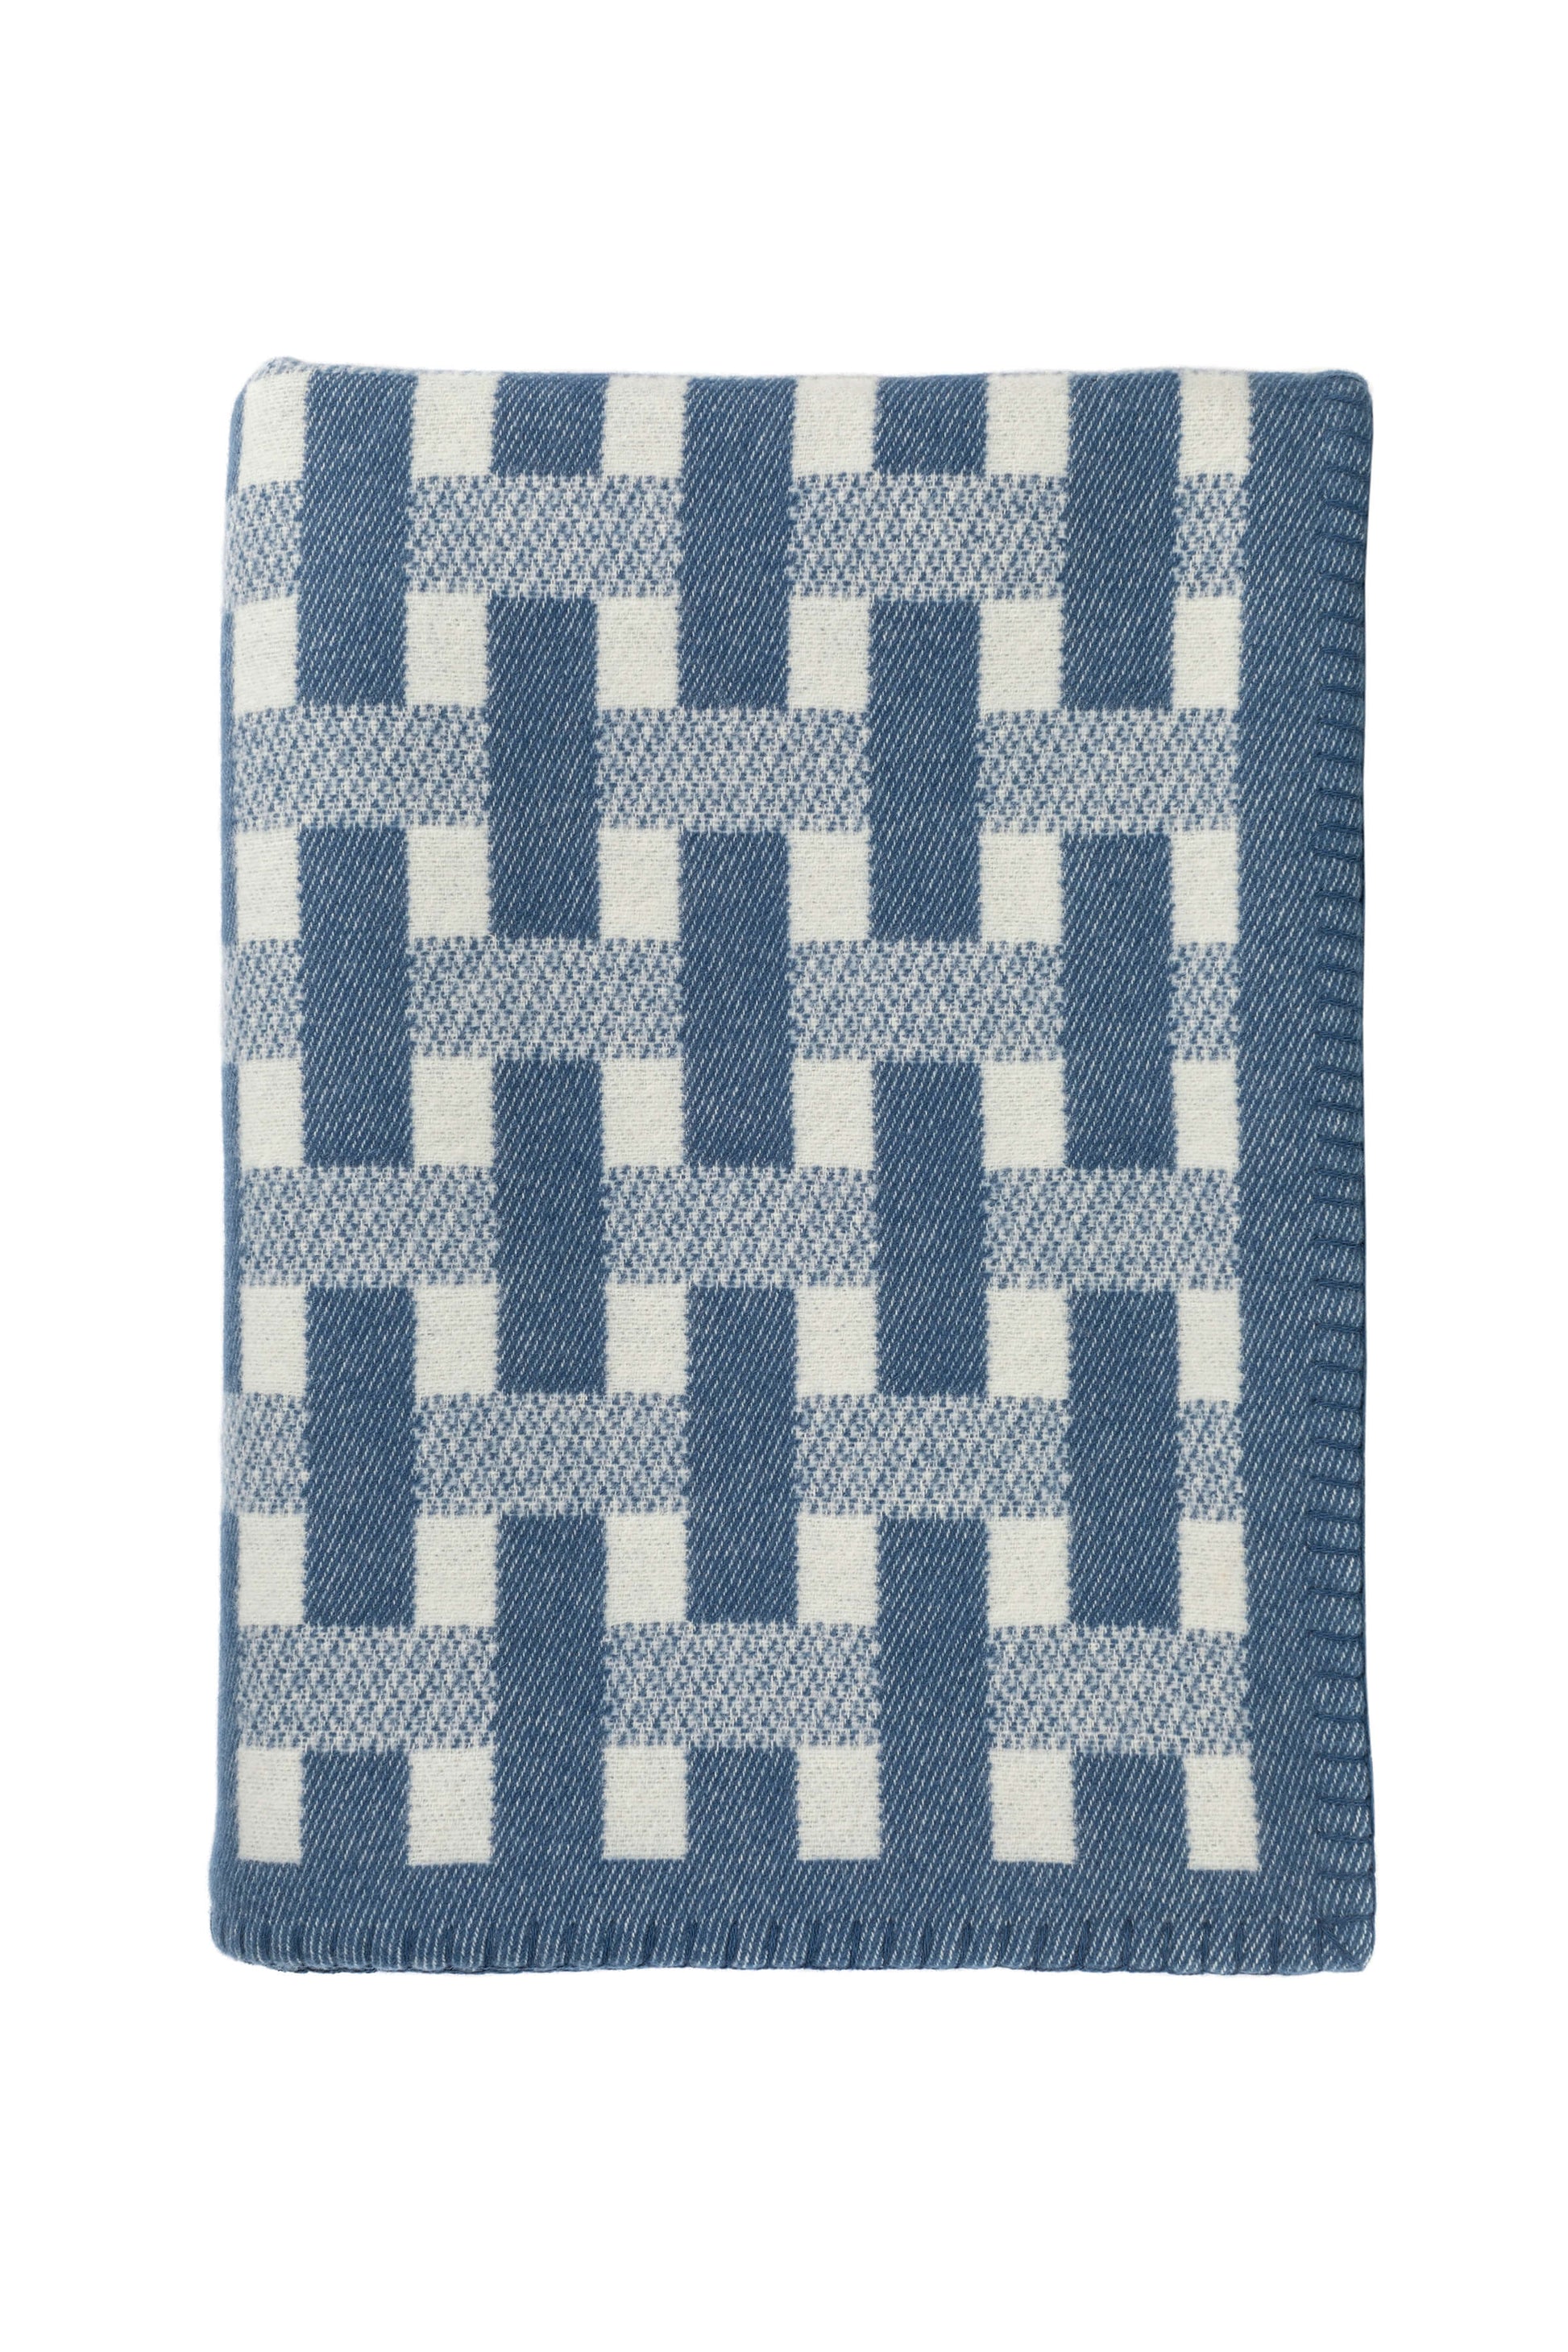 Johnstons of Elgin 2024 Blanket Collection Sapphire & White Blanket Stitched Basketweave Throw TB000500RU7444ONE